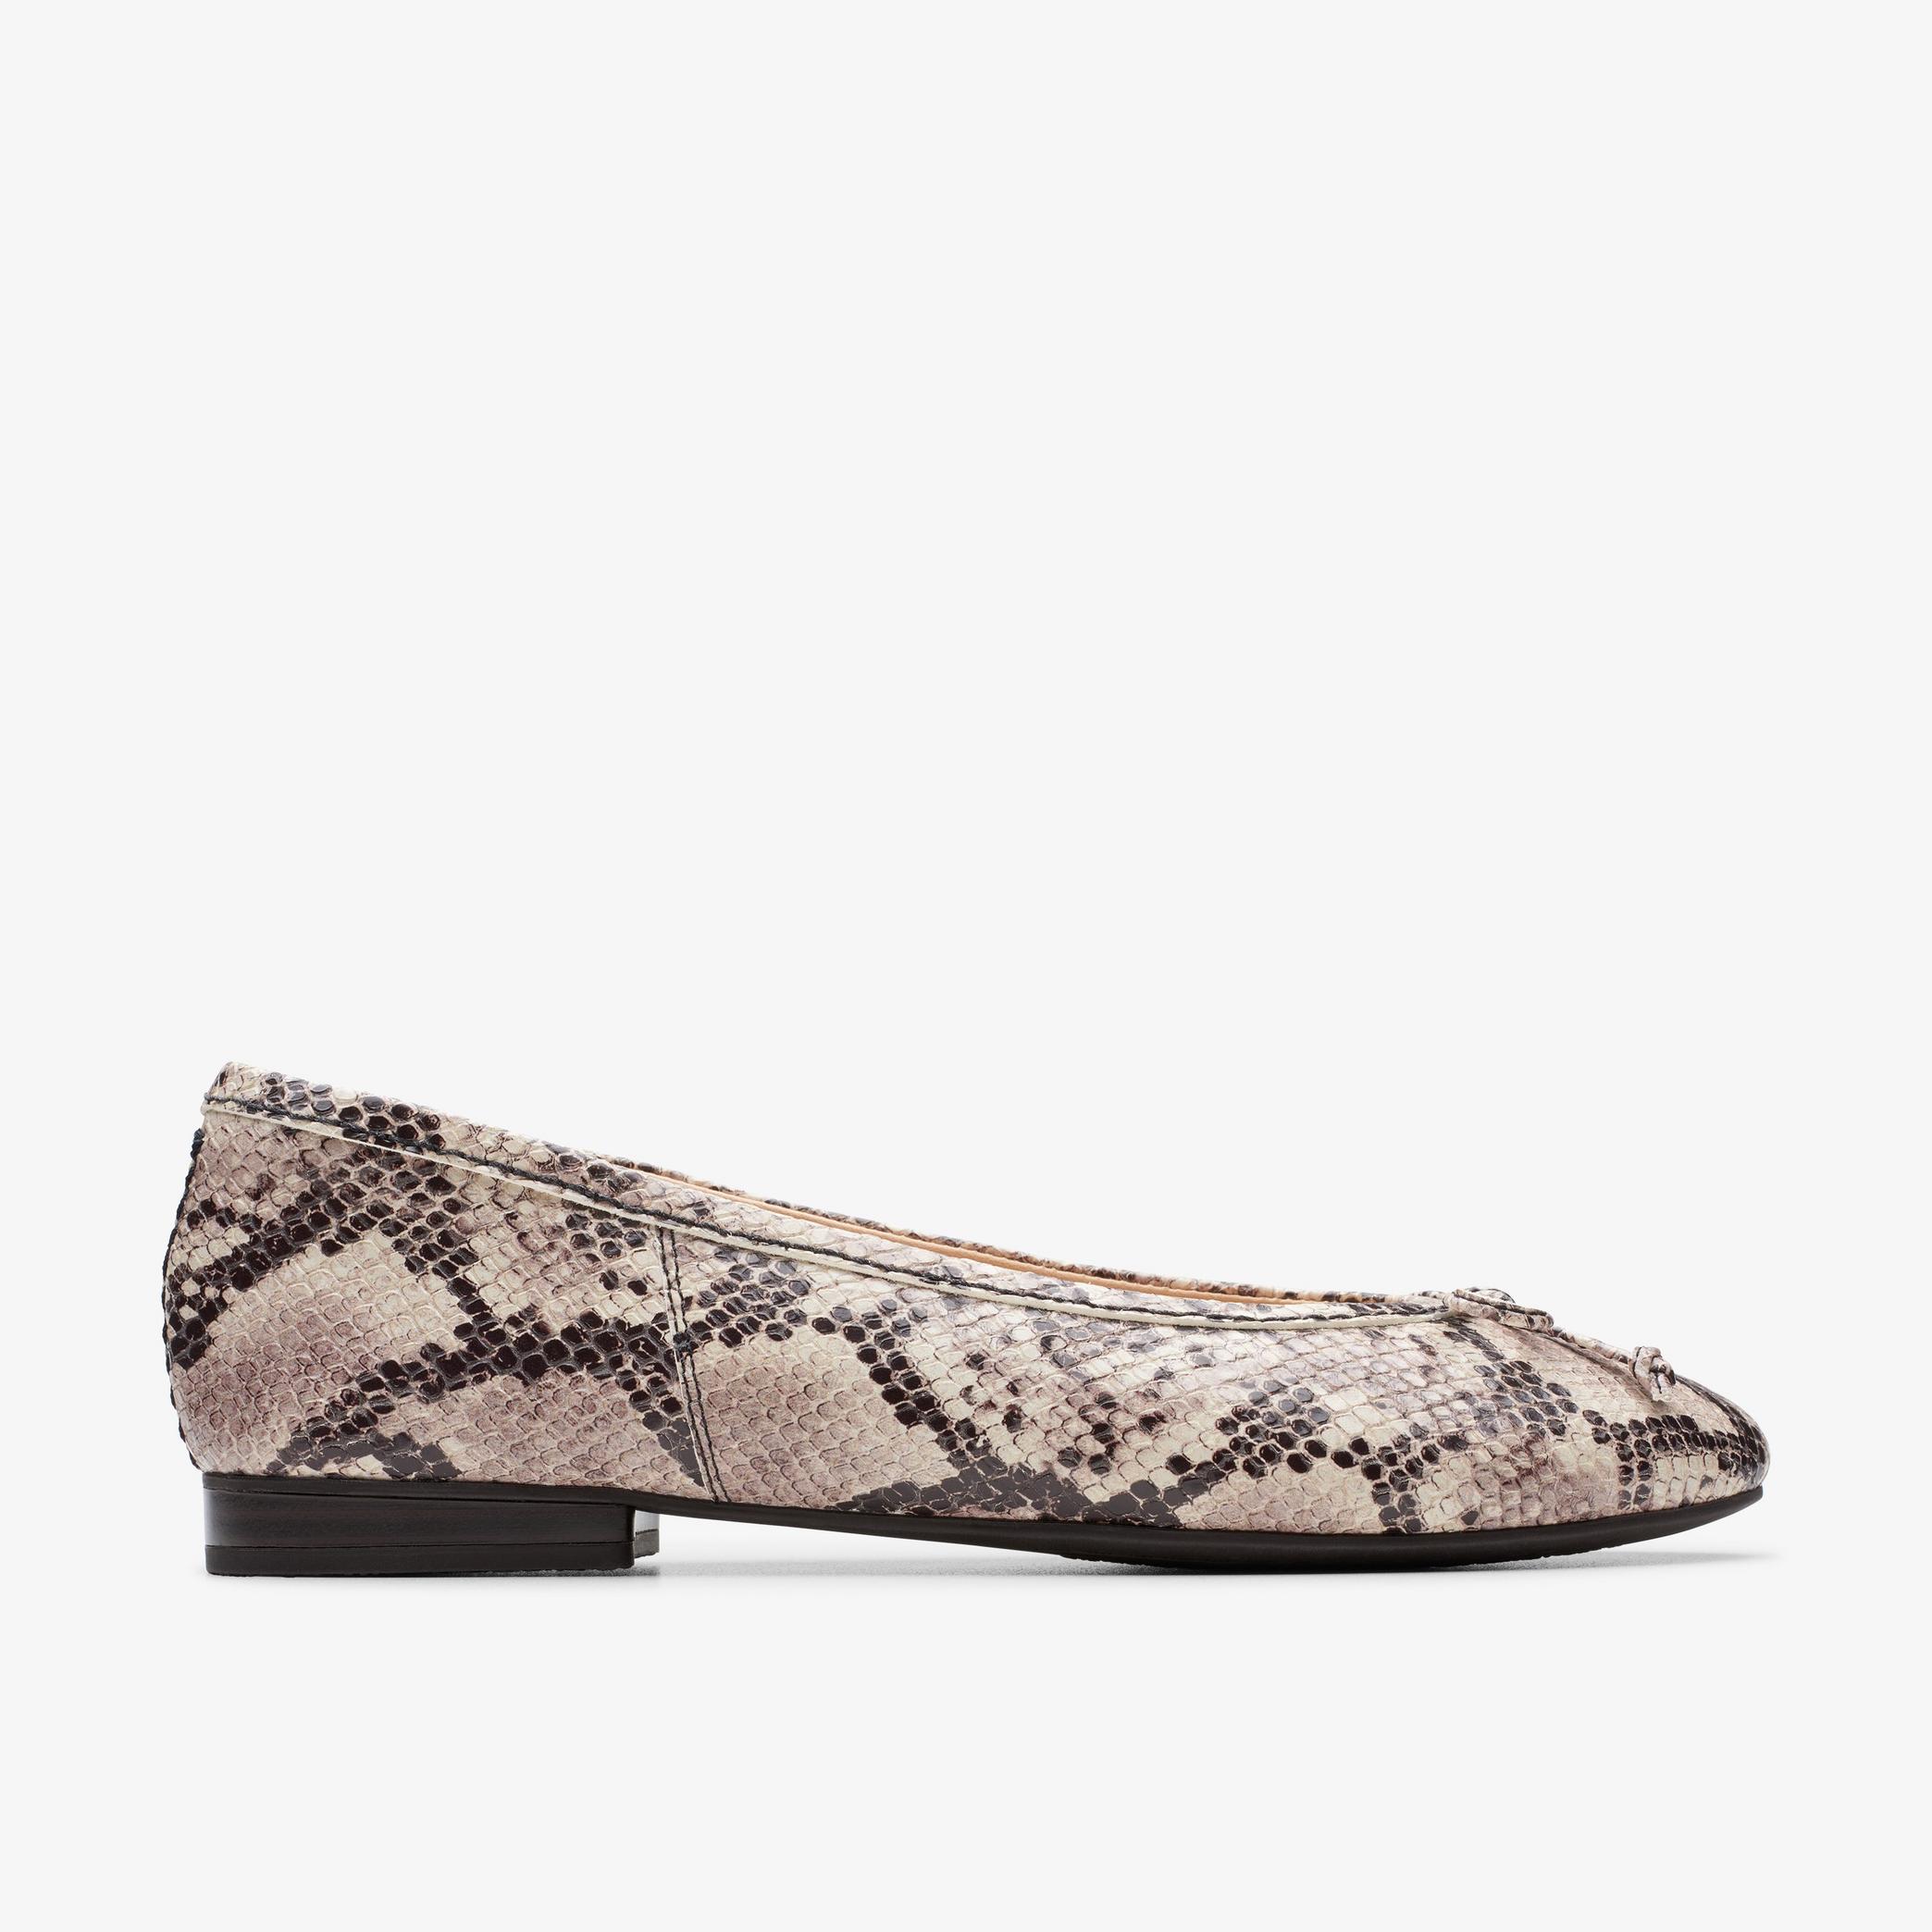 Fawna Lily Snake Print Ballerina, view 1 of 7